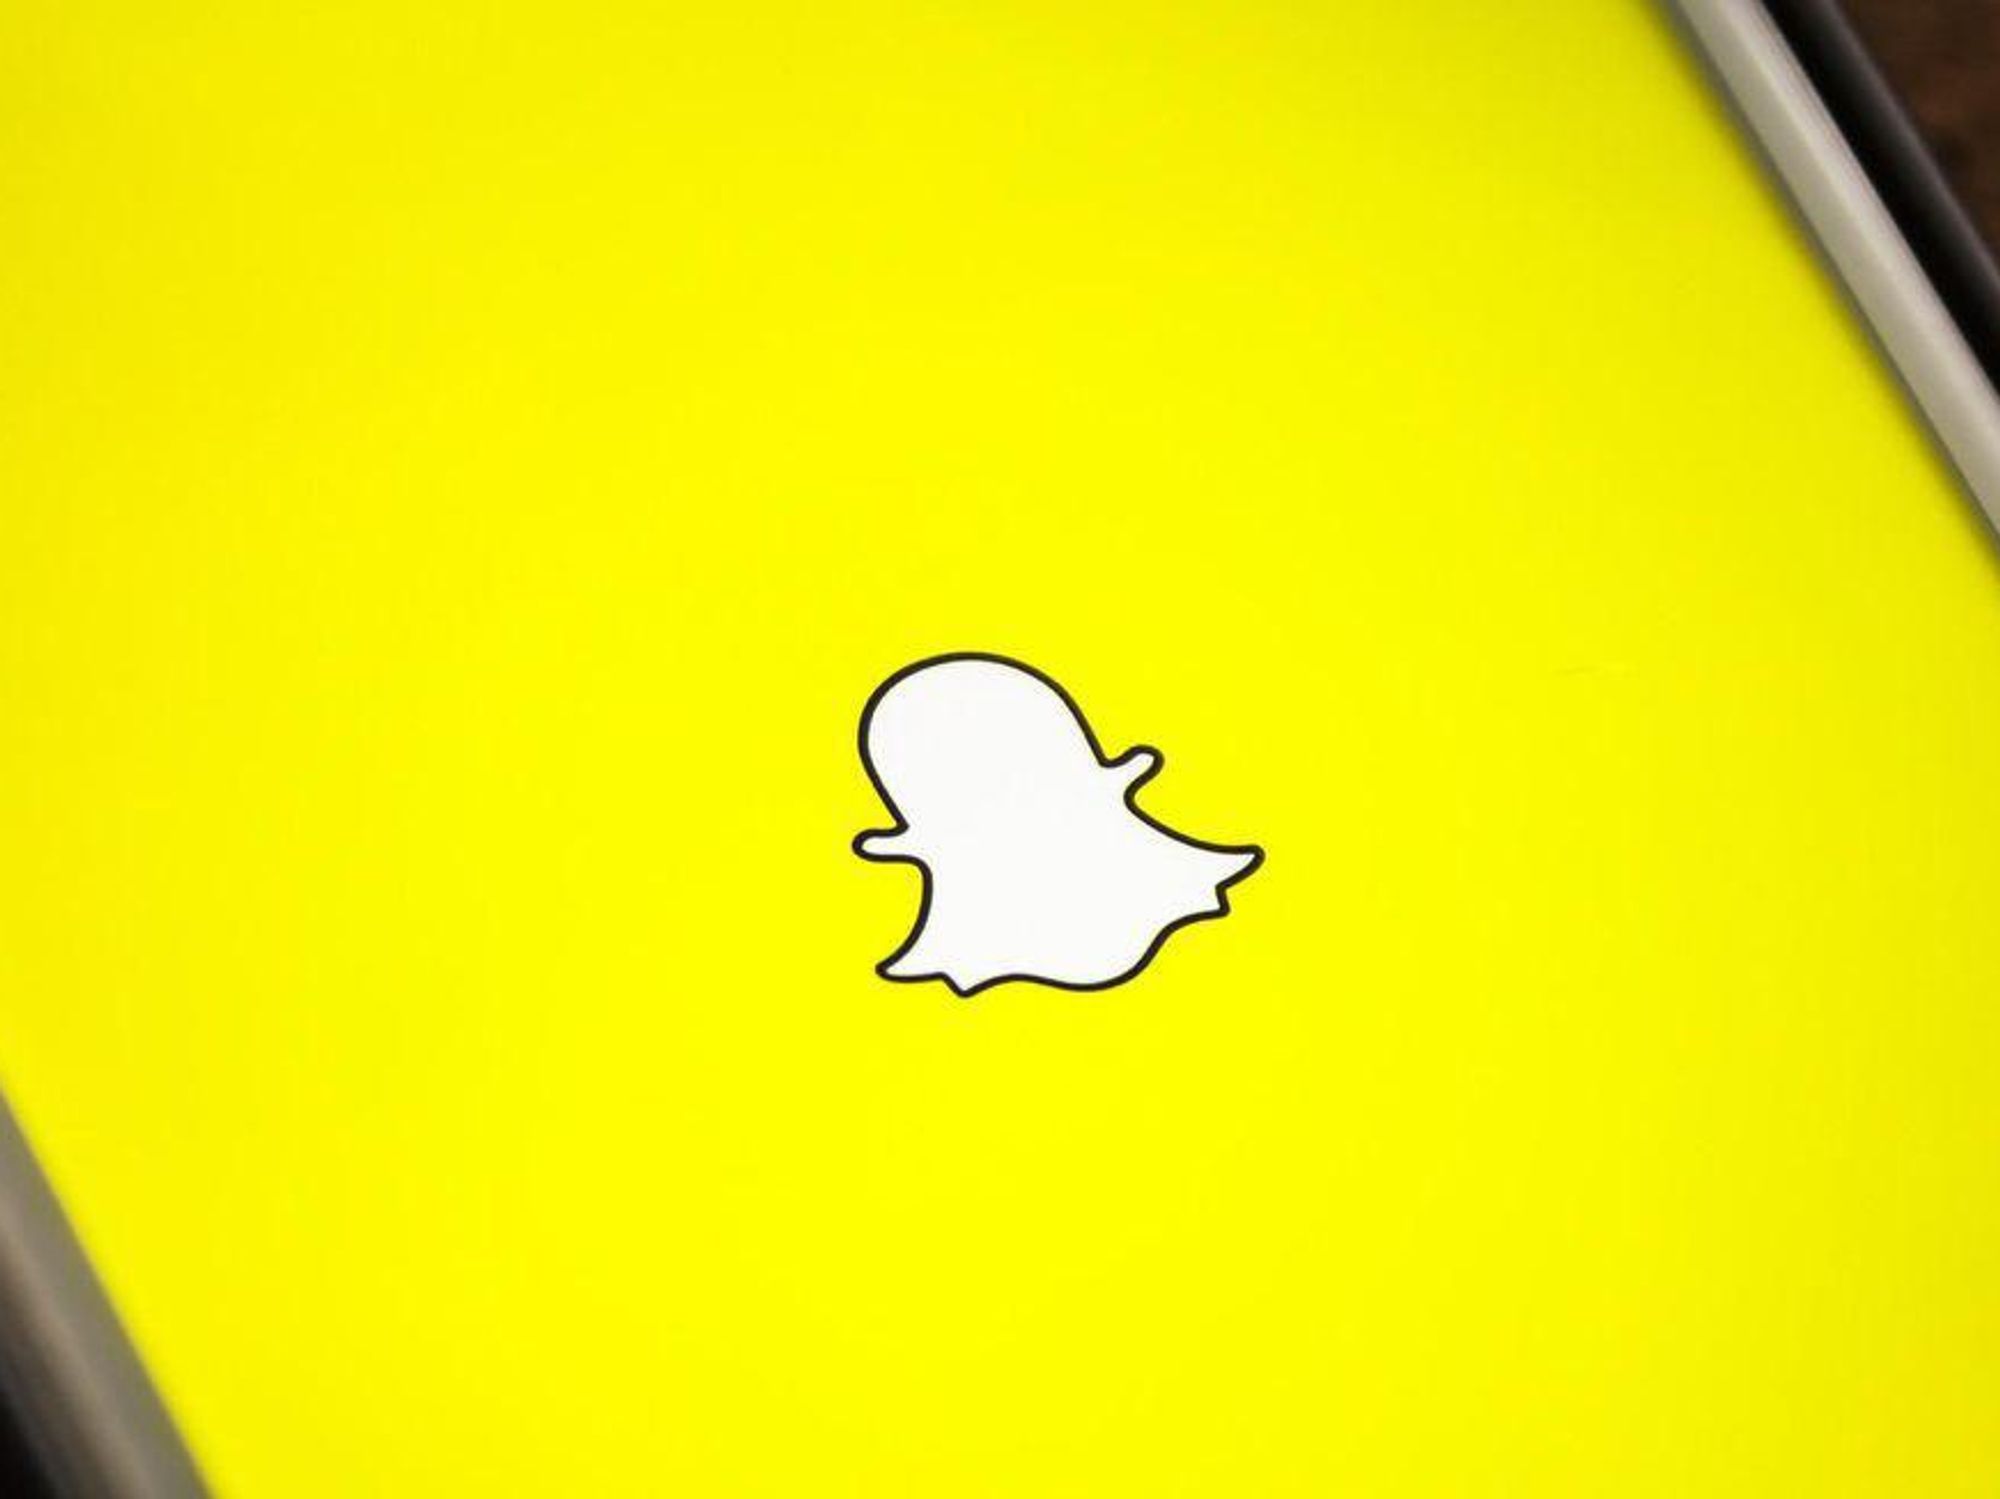 Snap Strikes Multi-Year Deal With Universal Music Group